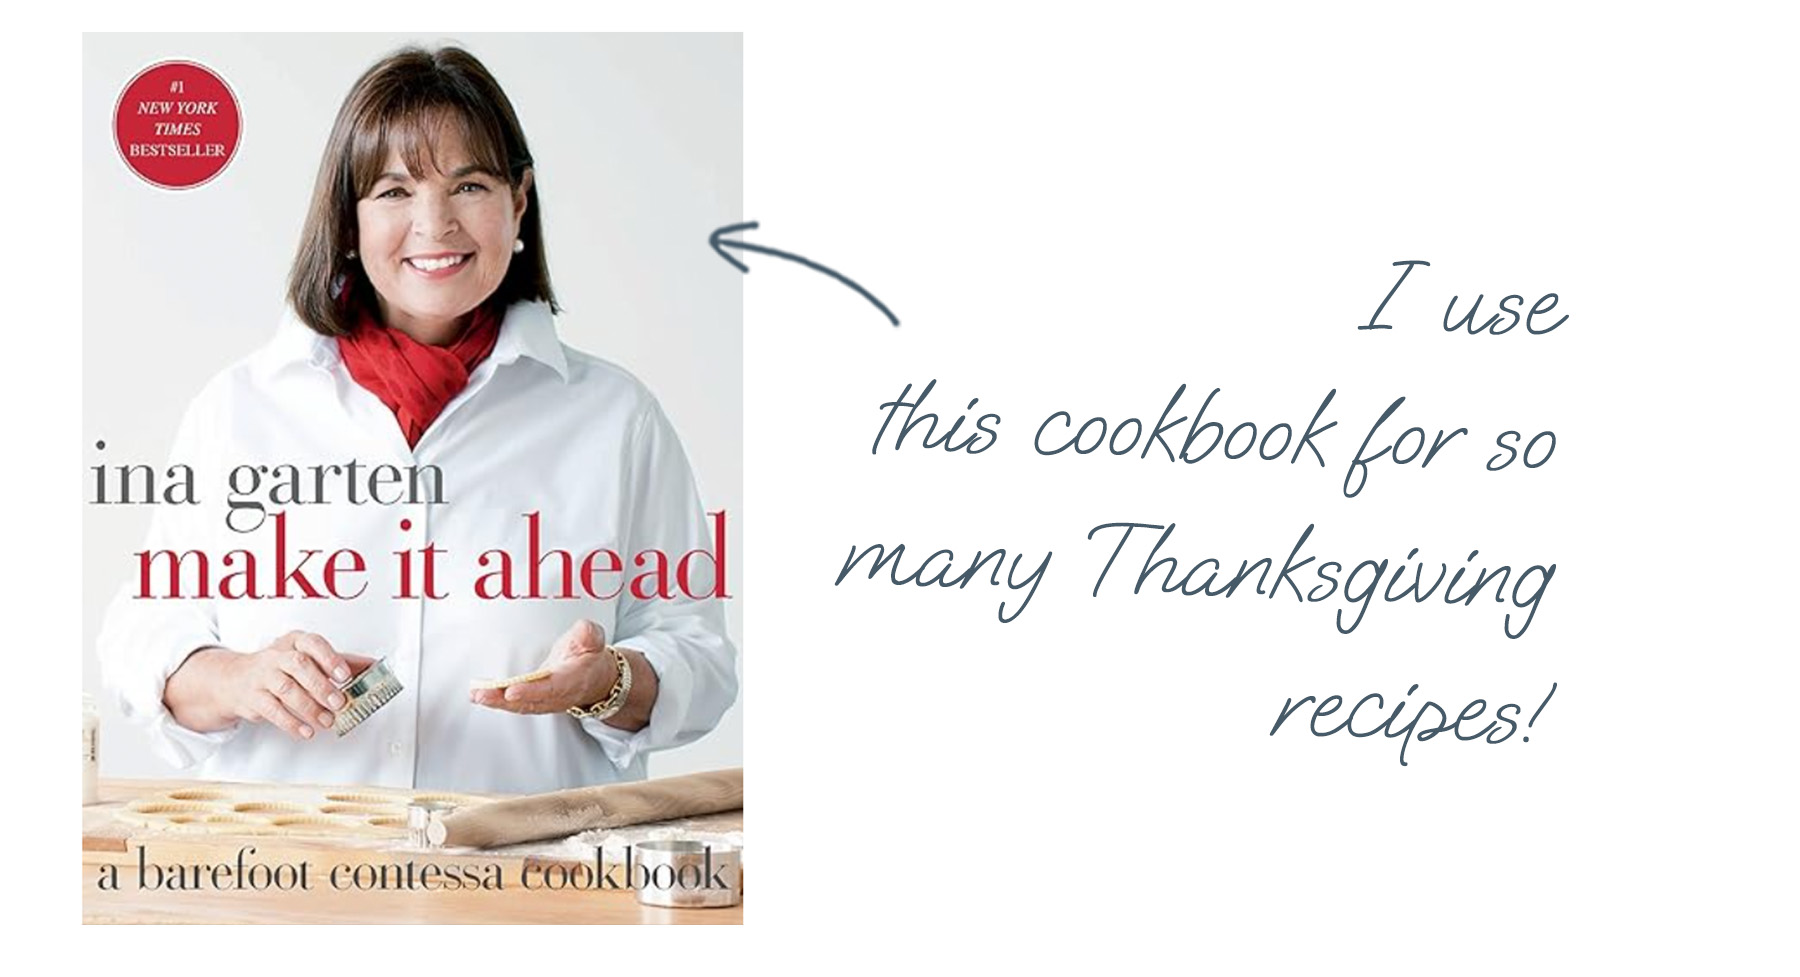 I use this cookbook for so many Thanksgiving recipes!